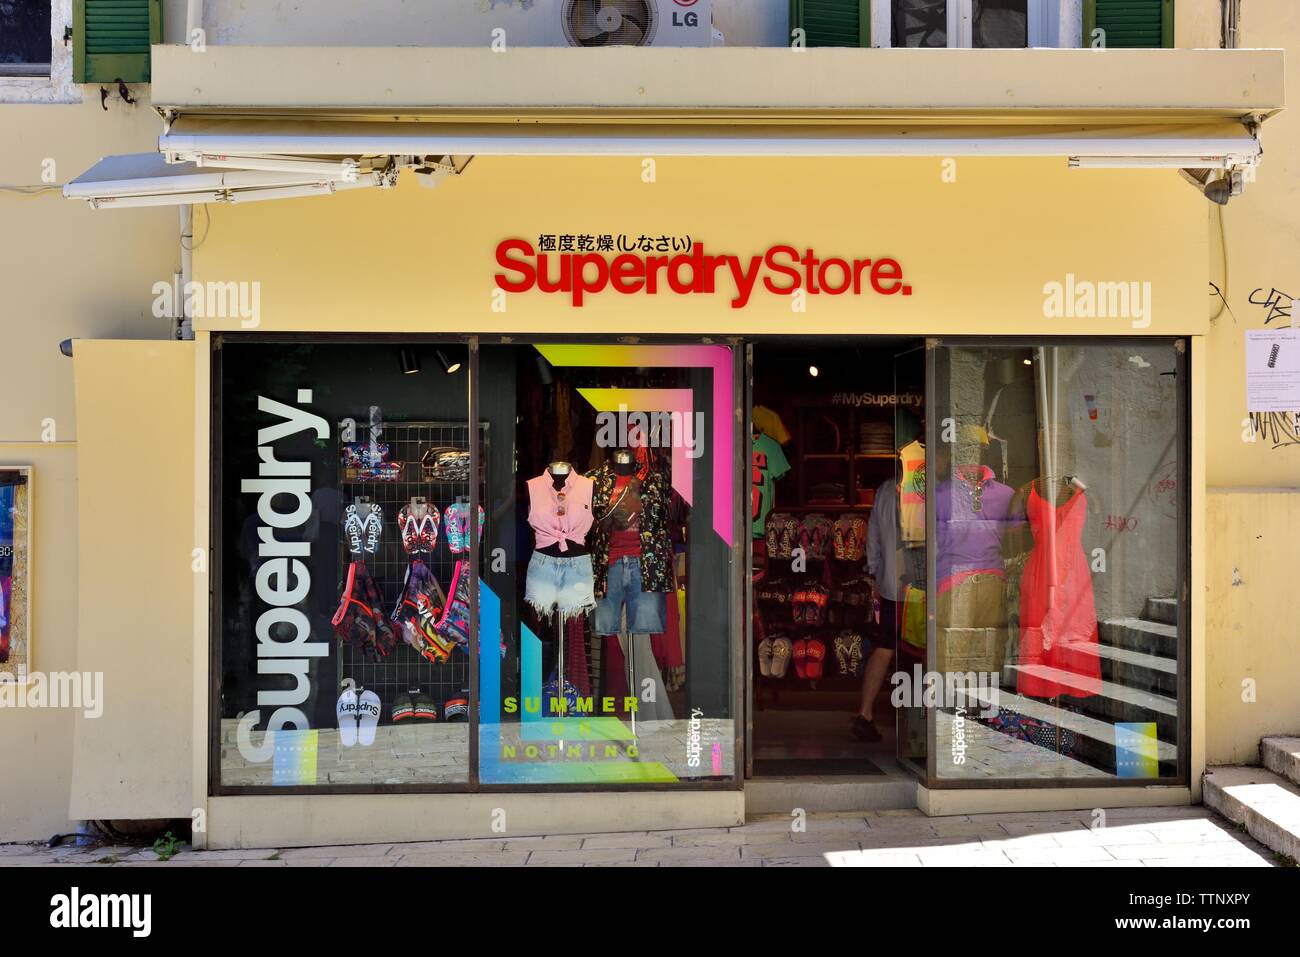 Superdry Shops High Resolution Stock Photography and Images - Alamy